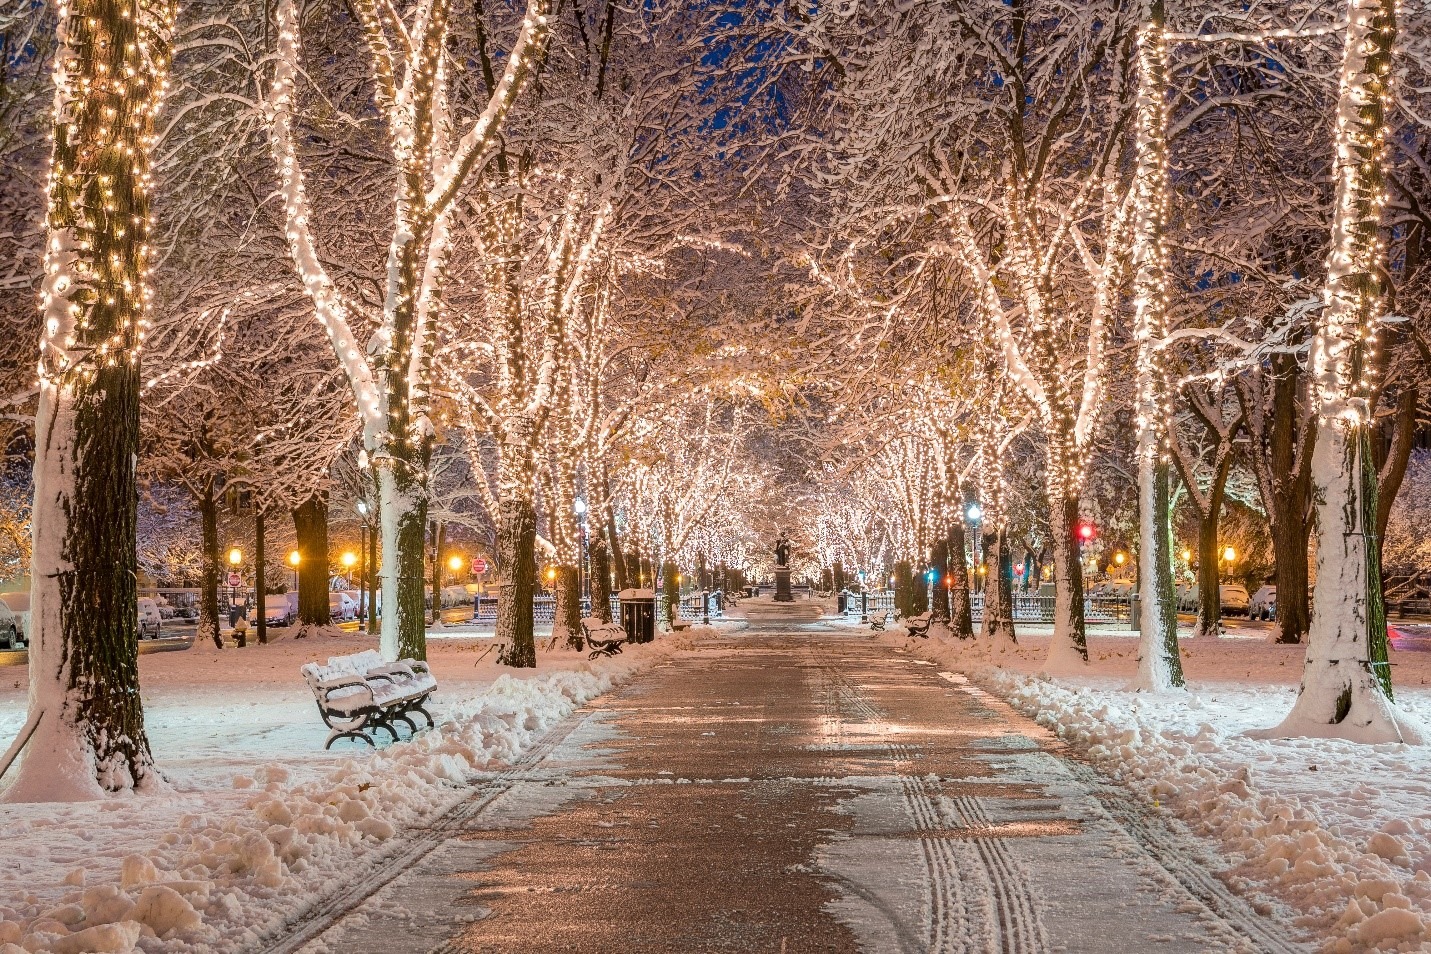 A walking path with trees decorated with holiday lights and covered in snow.